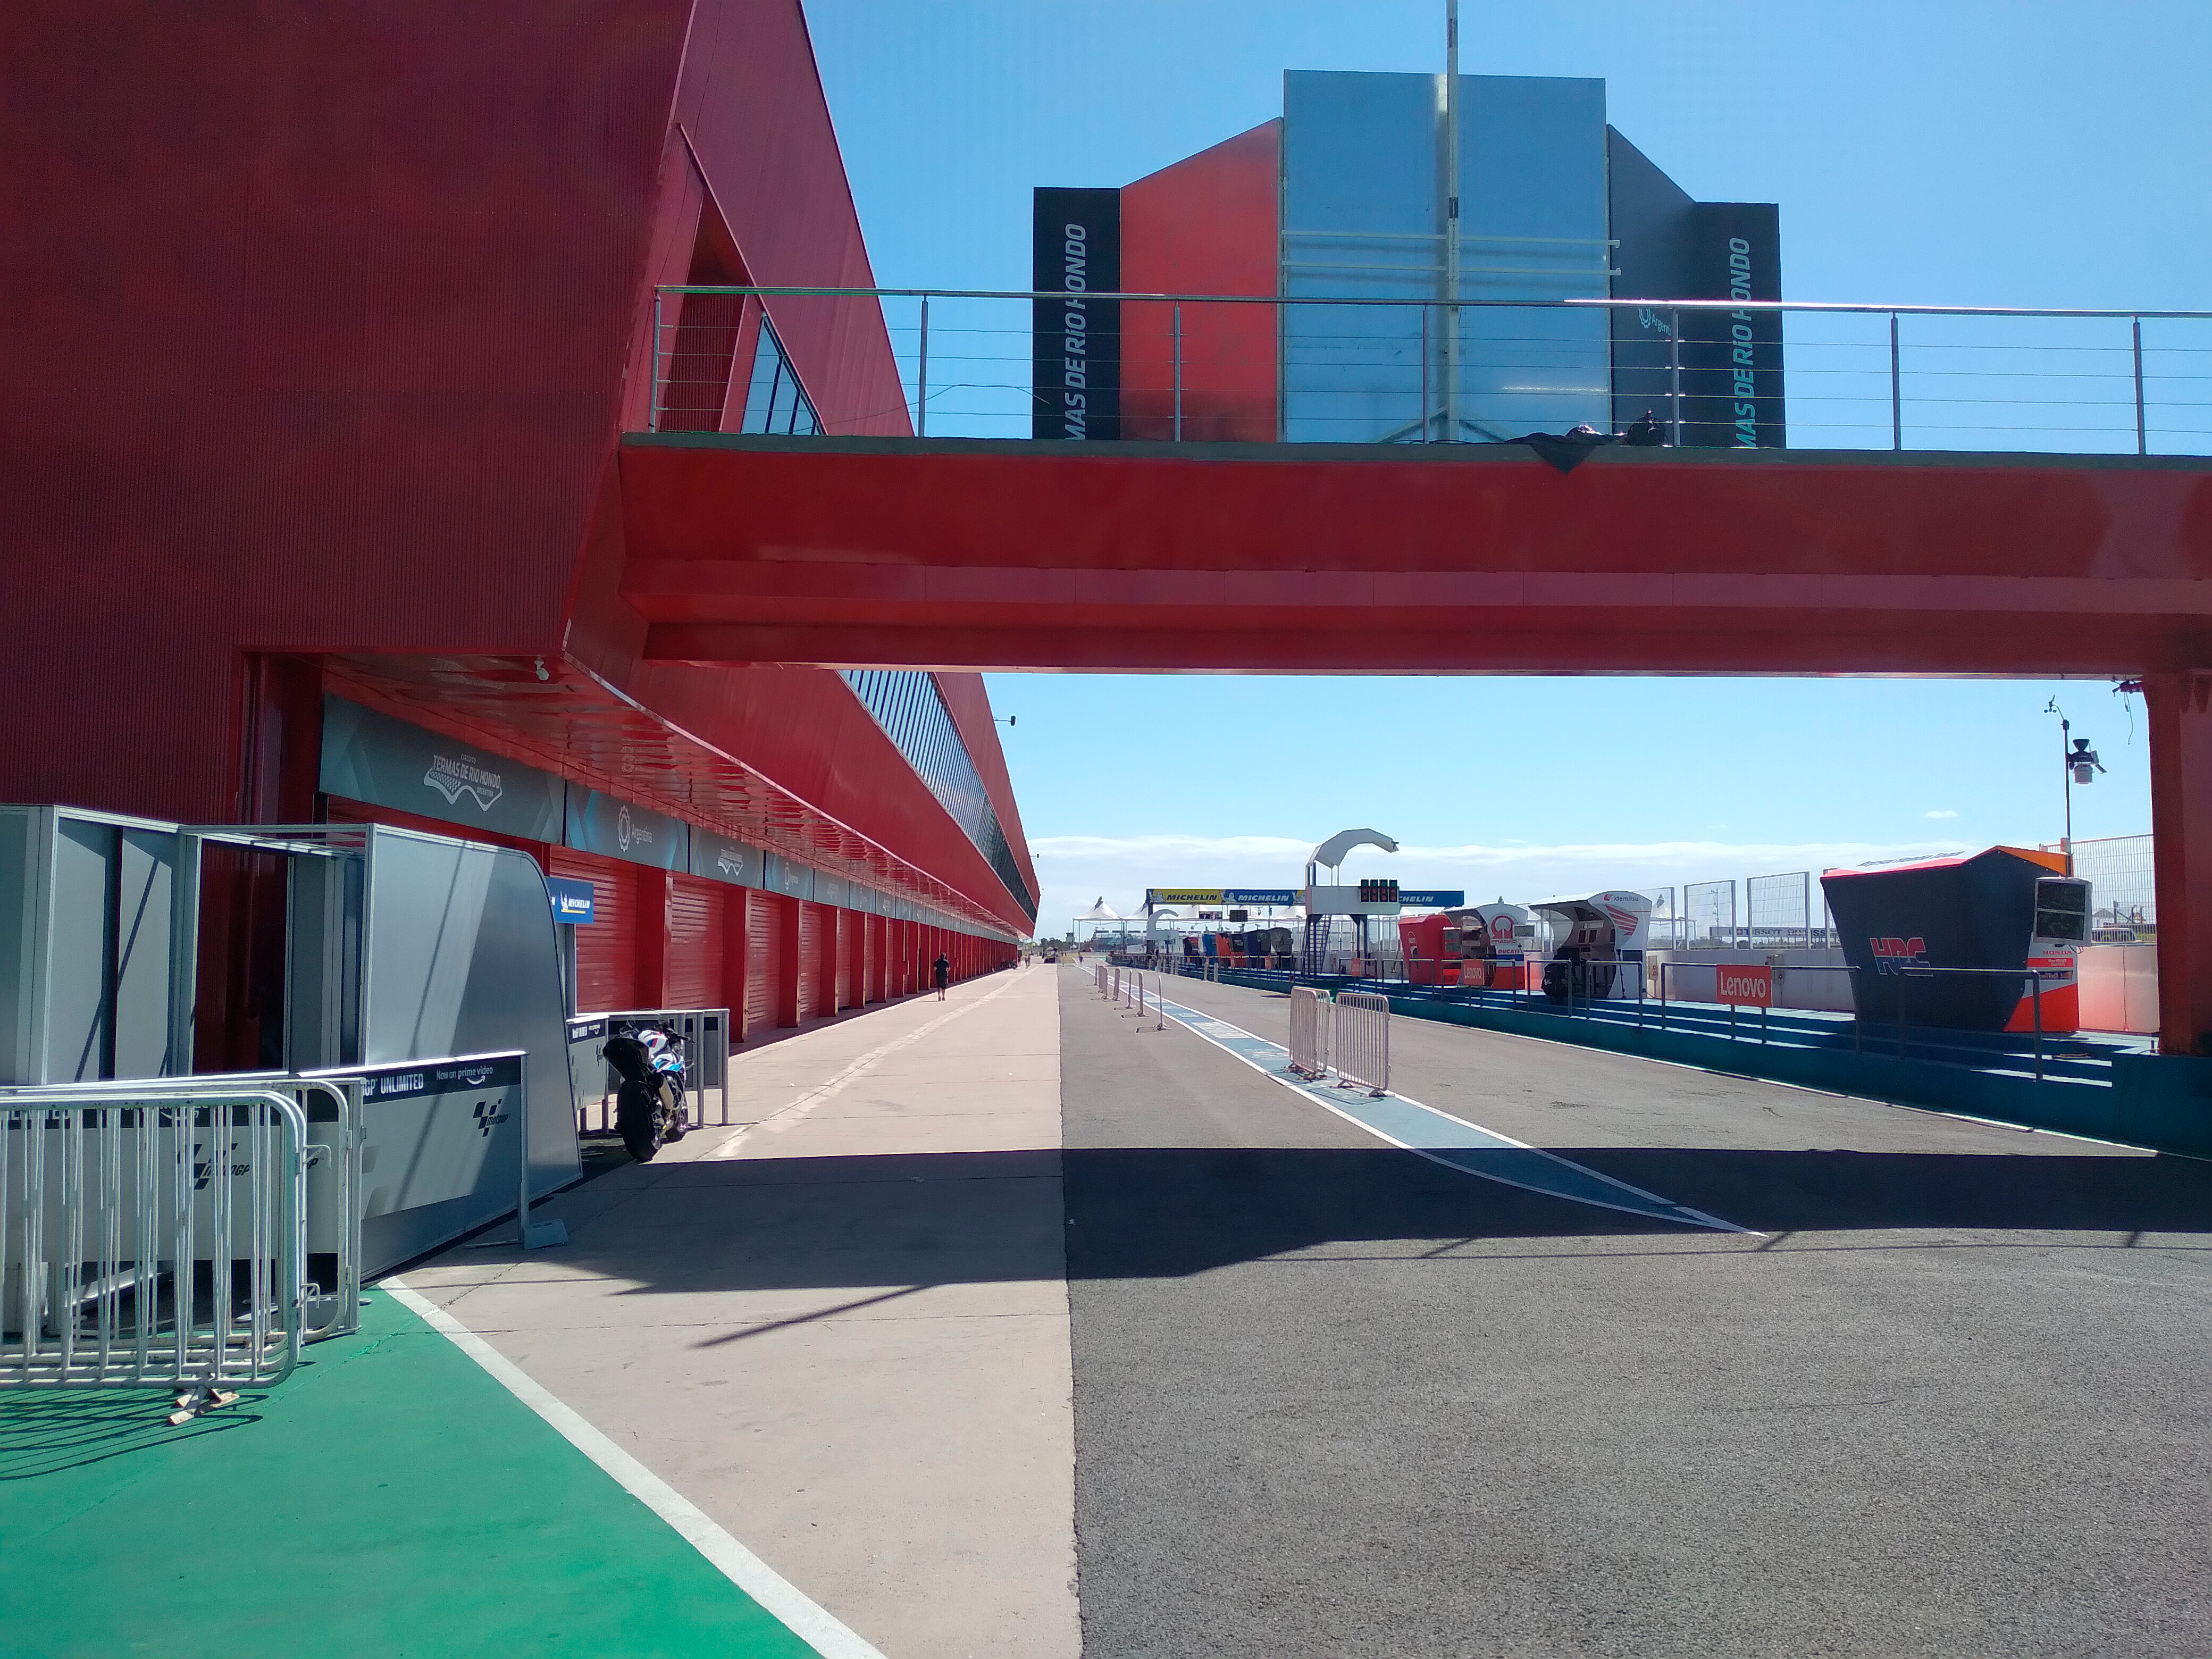 The brand new building of the Santiago circuit